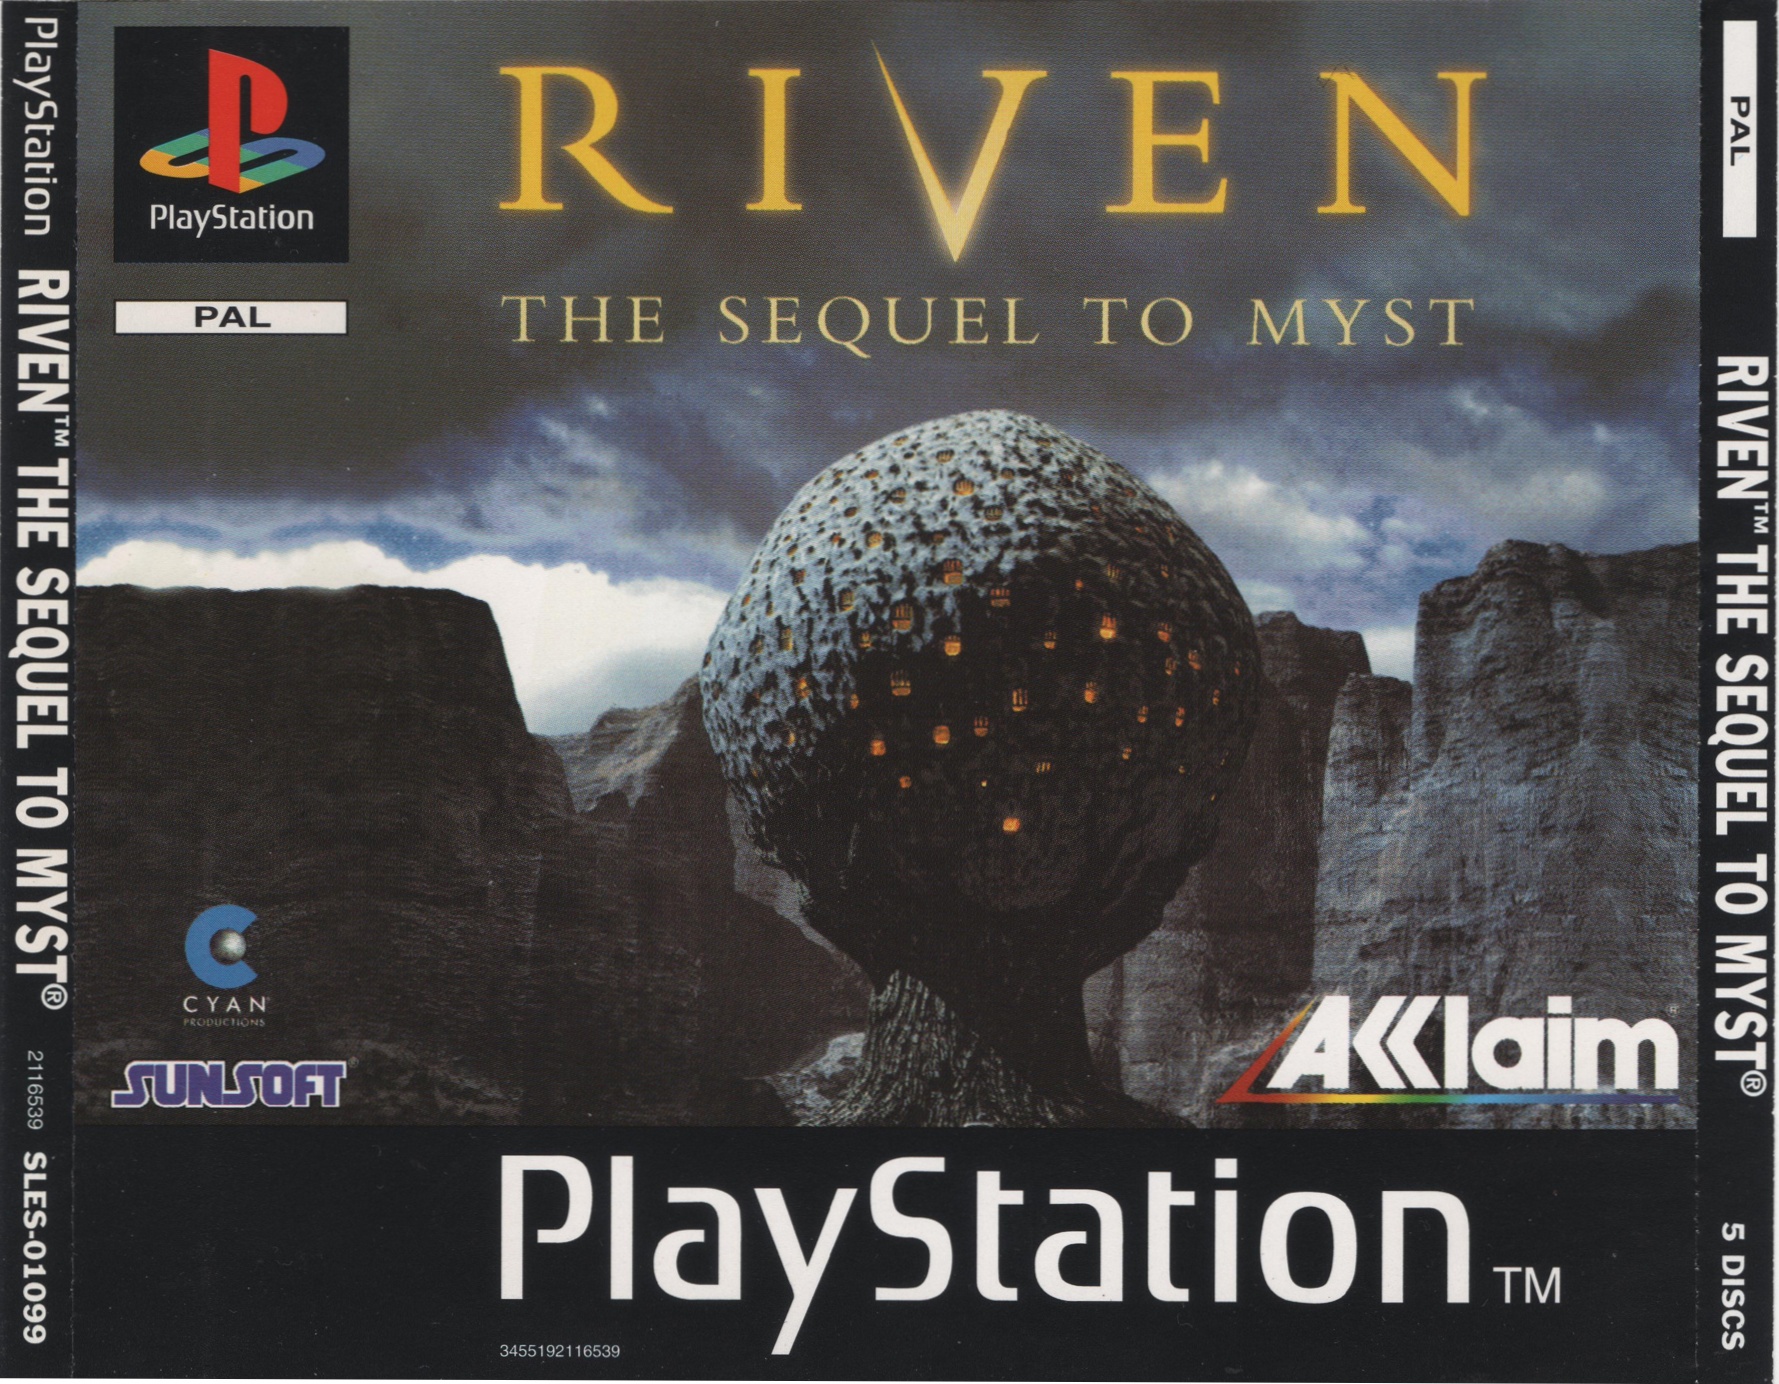 Riven the sequel to myst. Myst ps1. Myst ps1 Скриншоты. Myst 1 ps1. Riven the sequel to Myst ps1.